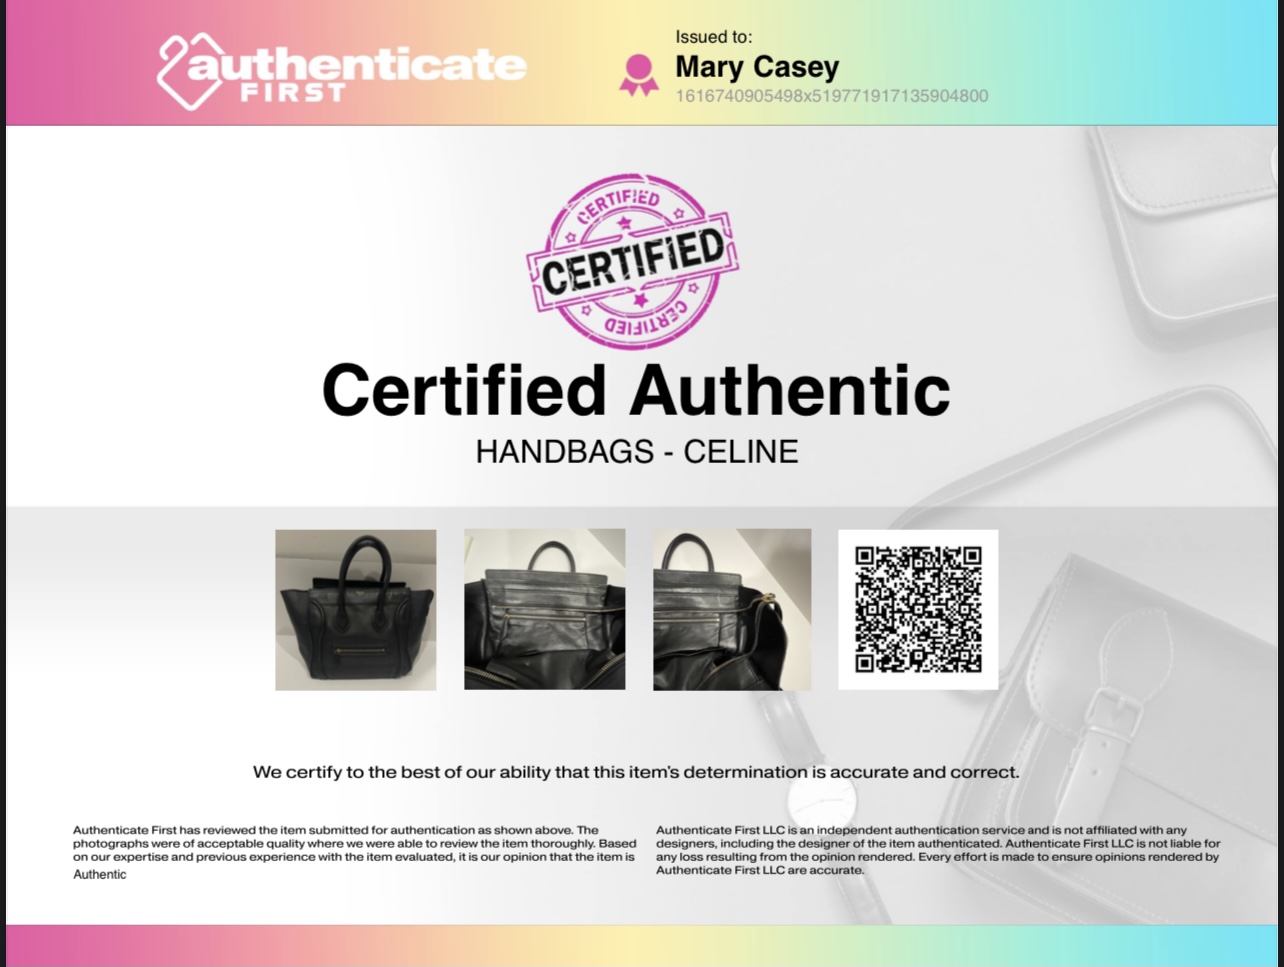 Authenticate First, Bags, Authenticatefirst